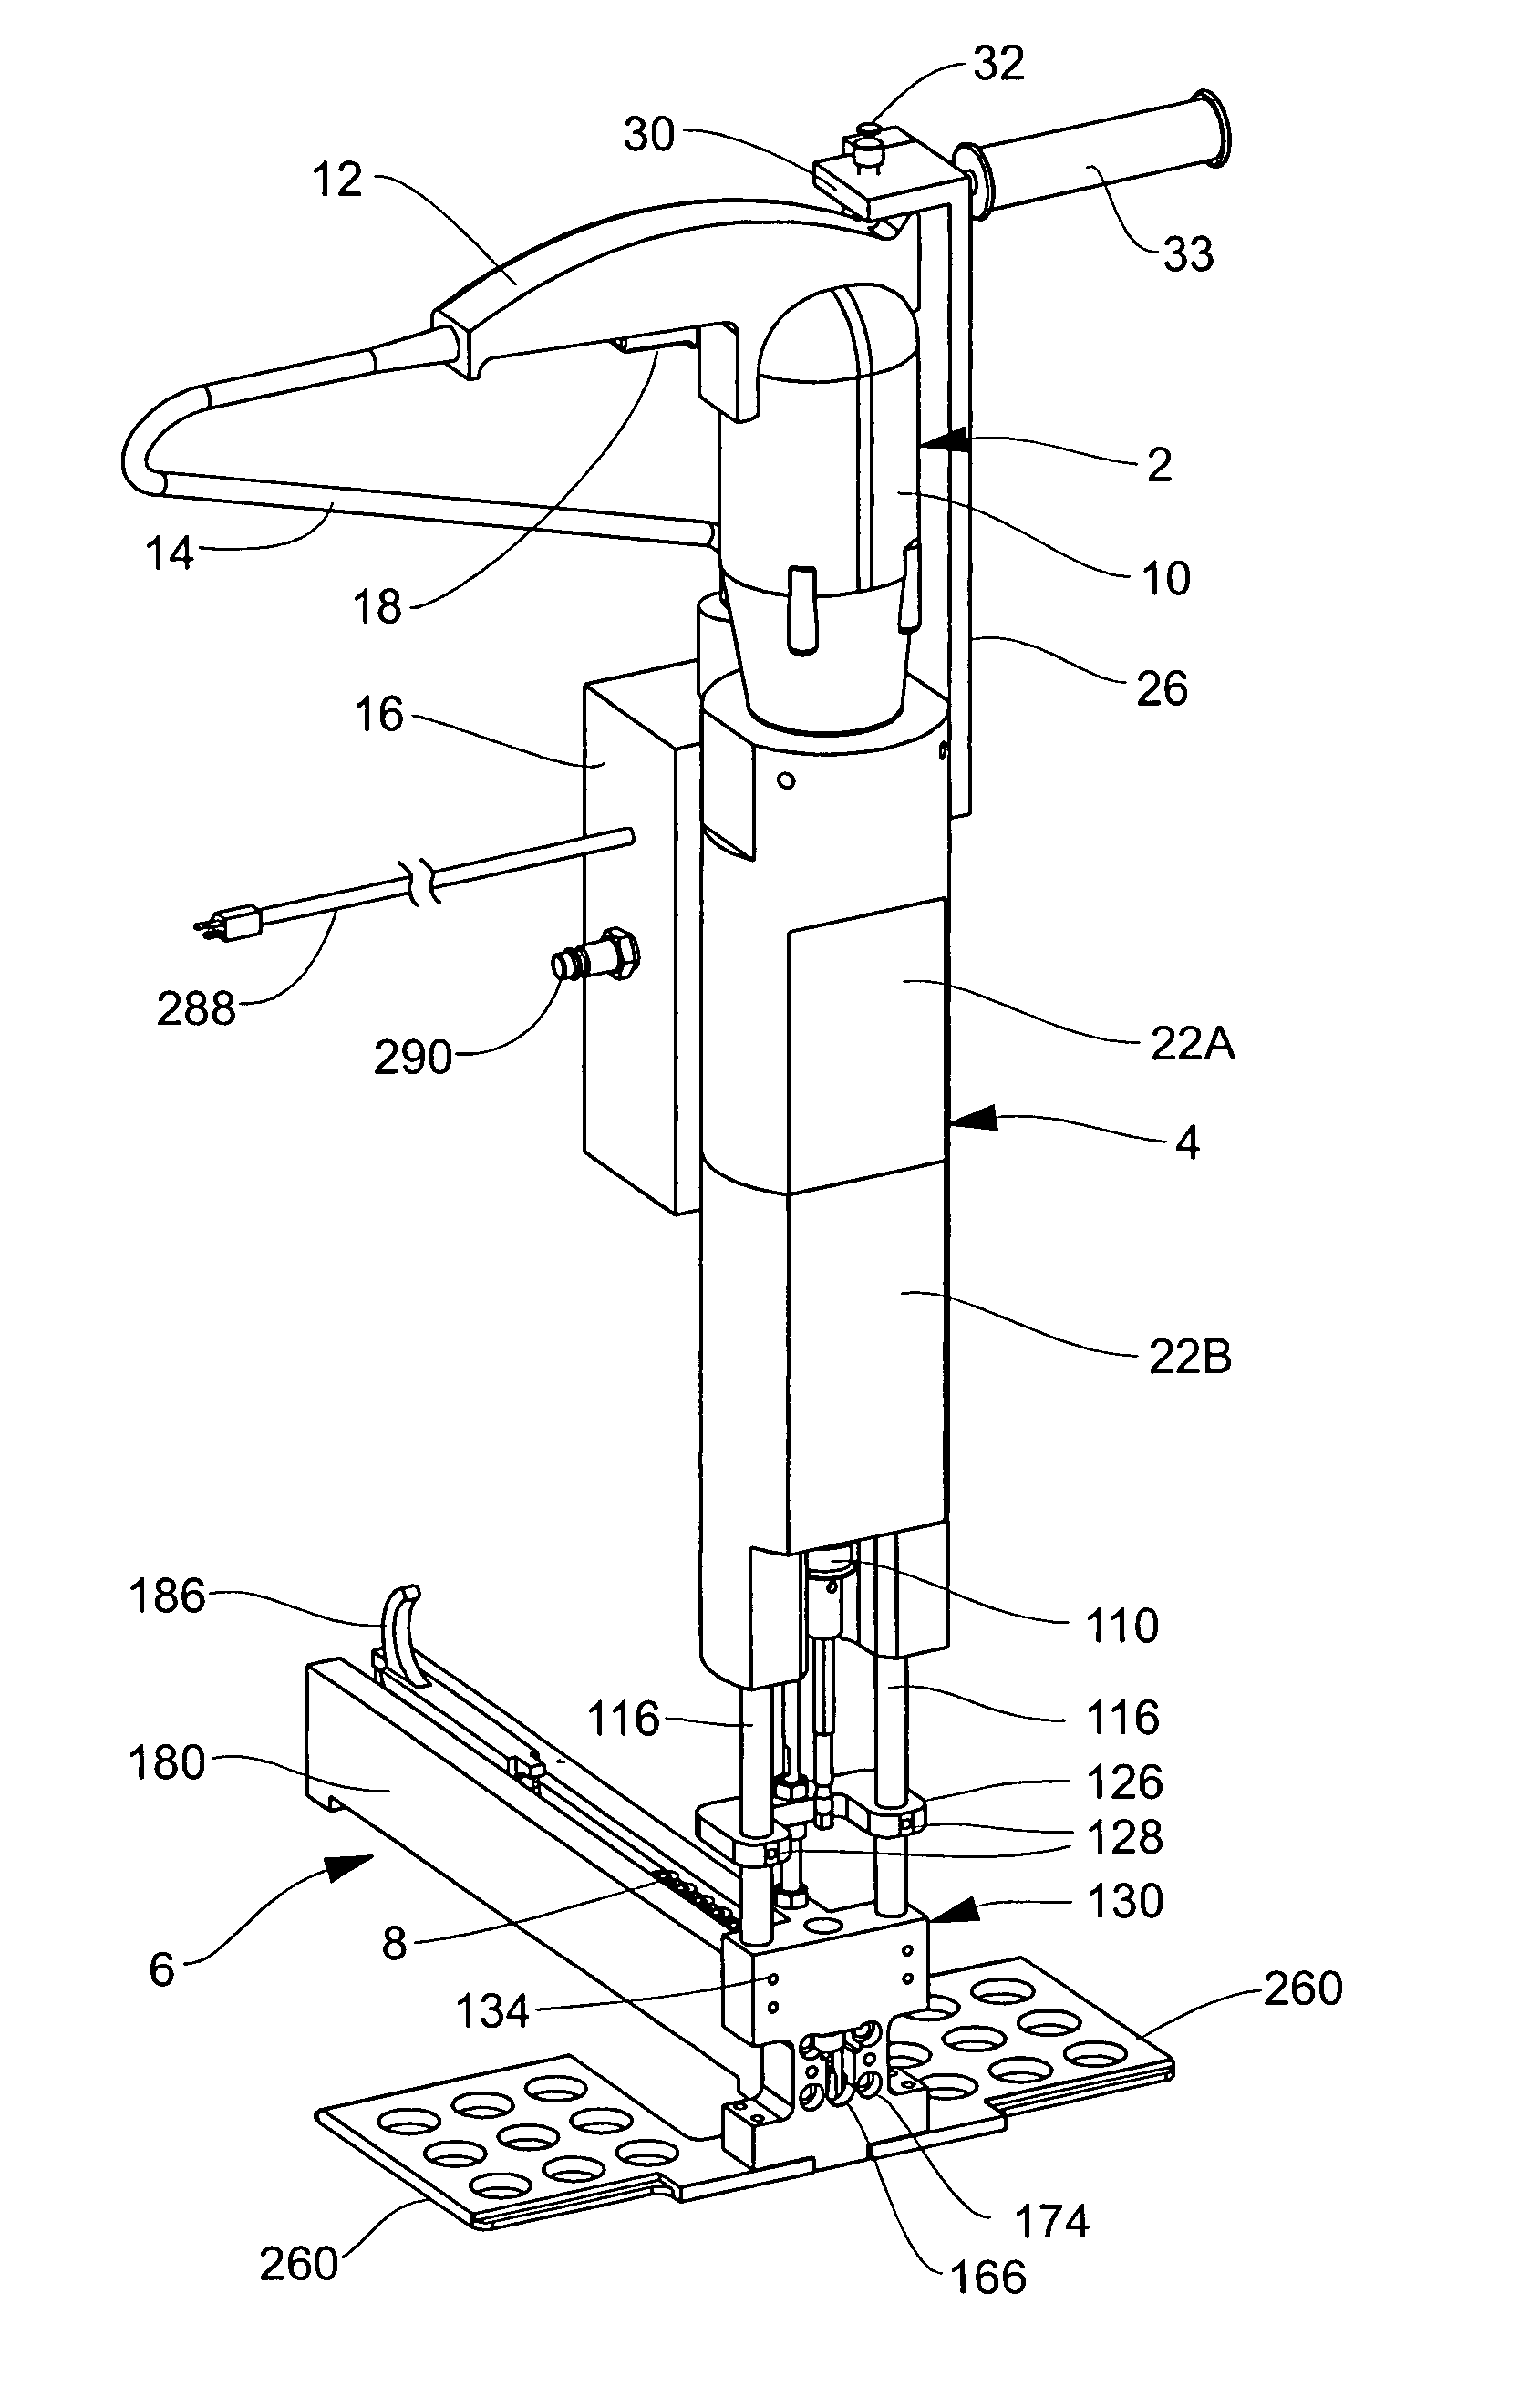 Apparatus and method for fastening together structural components